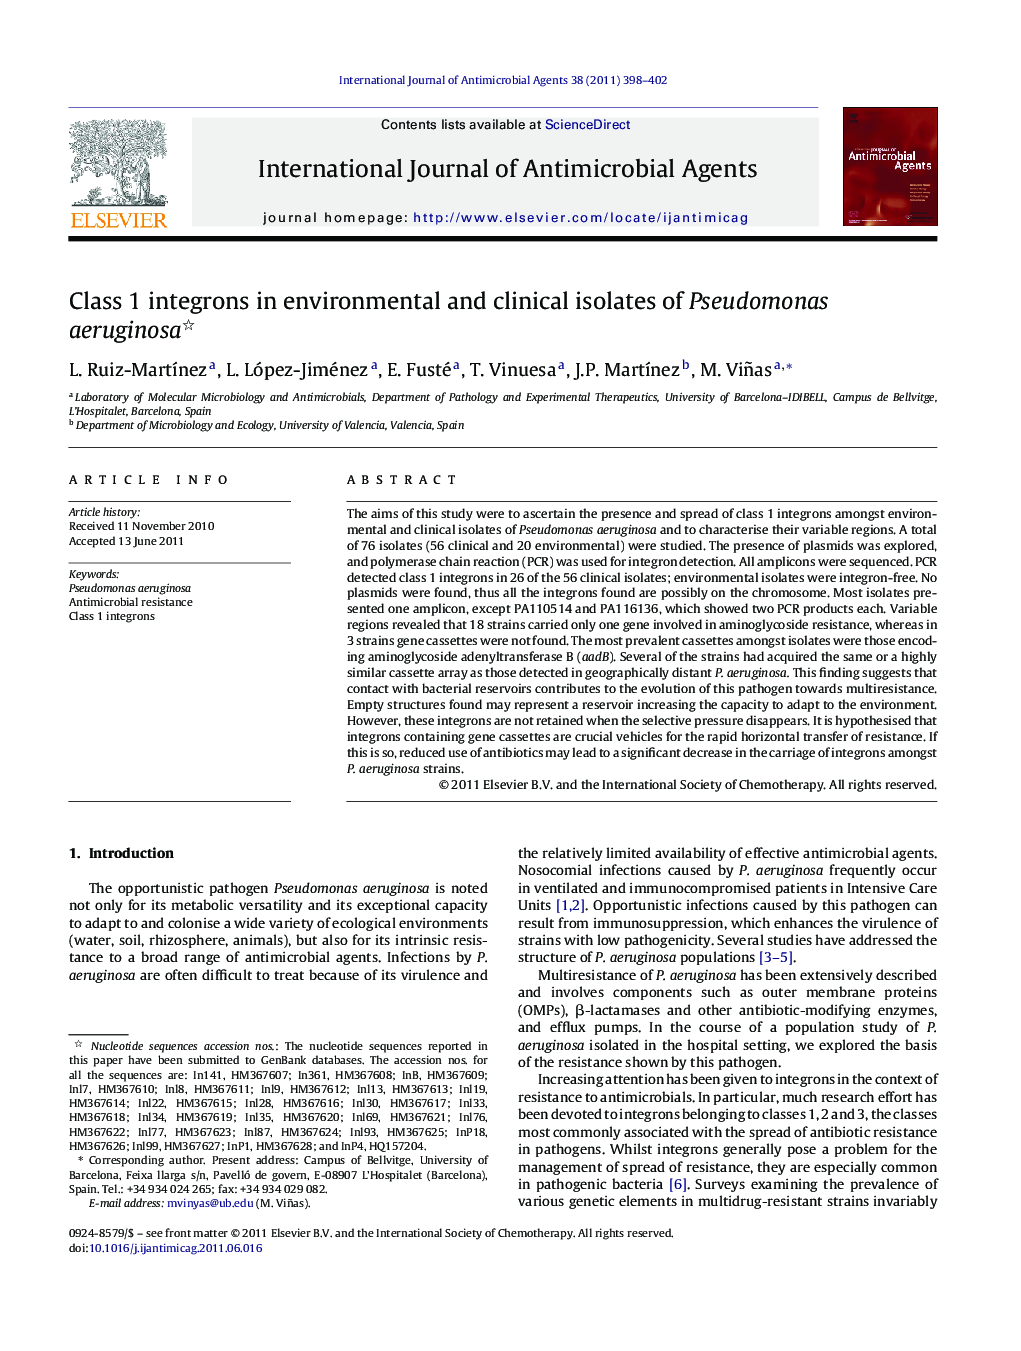 Class 1 integrons in environmental and clinical isolates of Pseudomonas aeruginosa